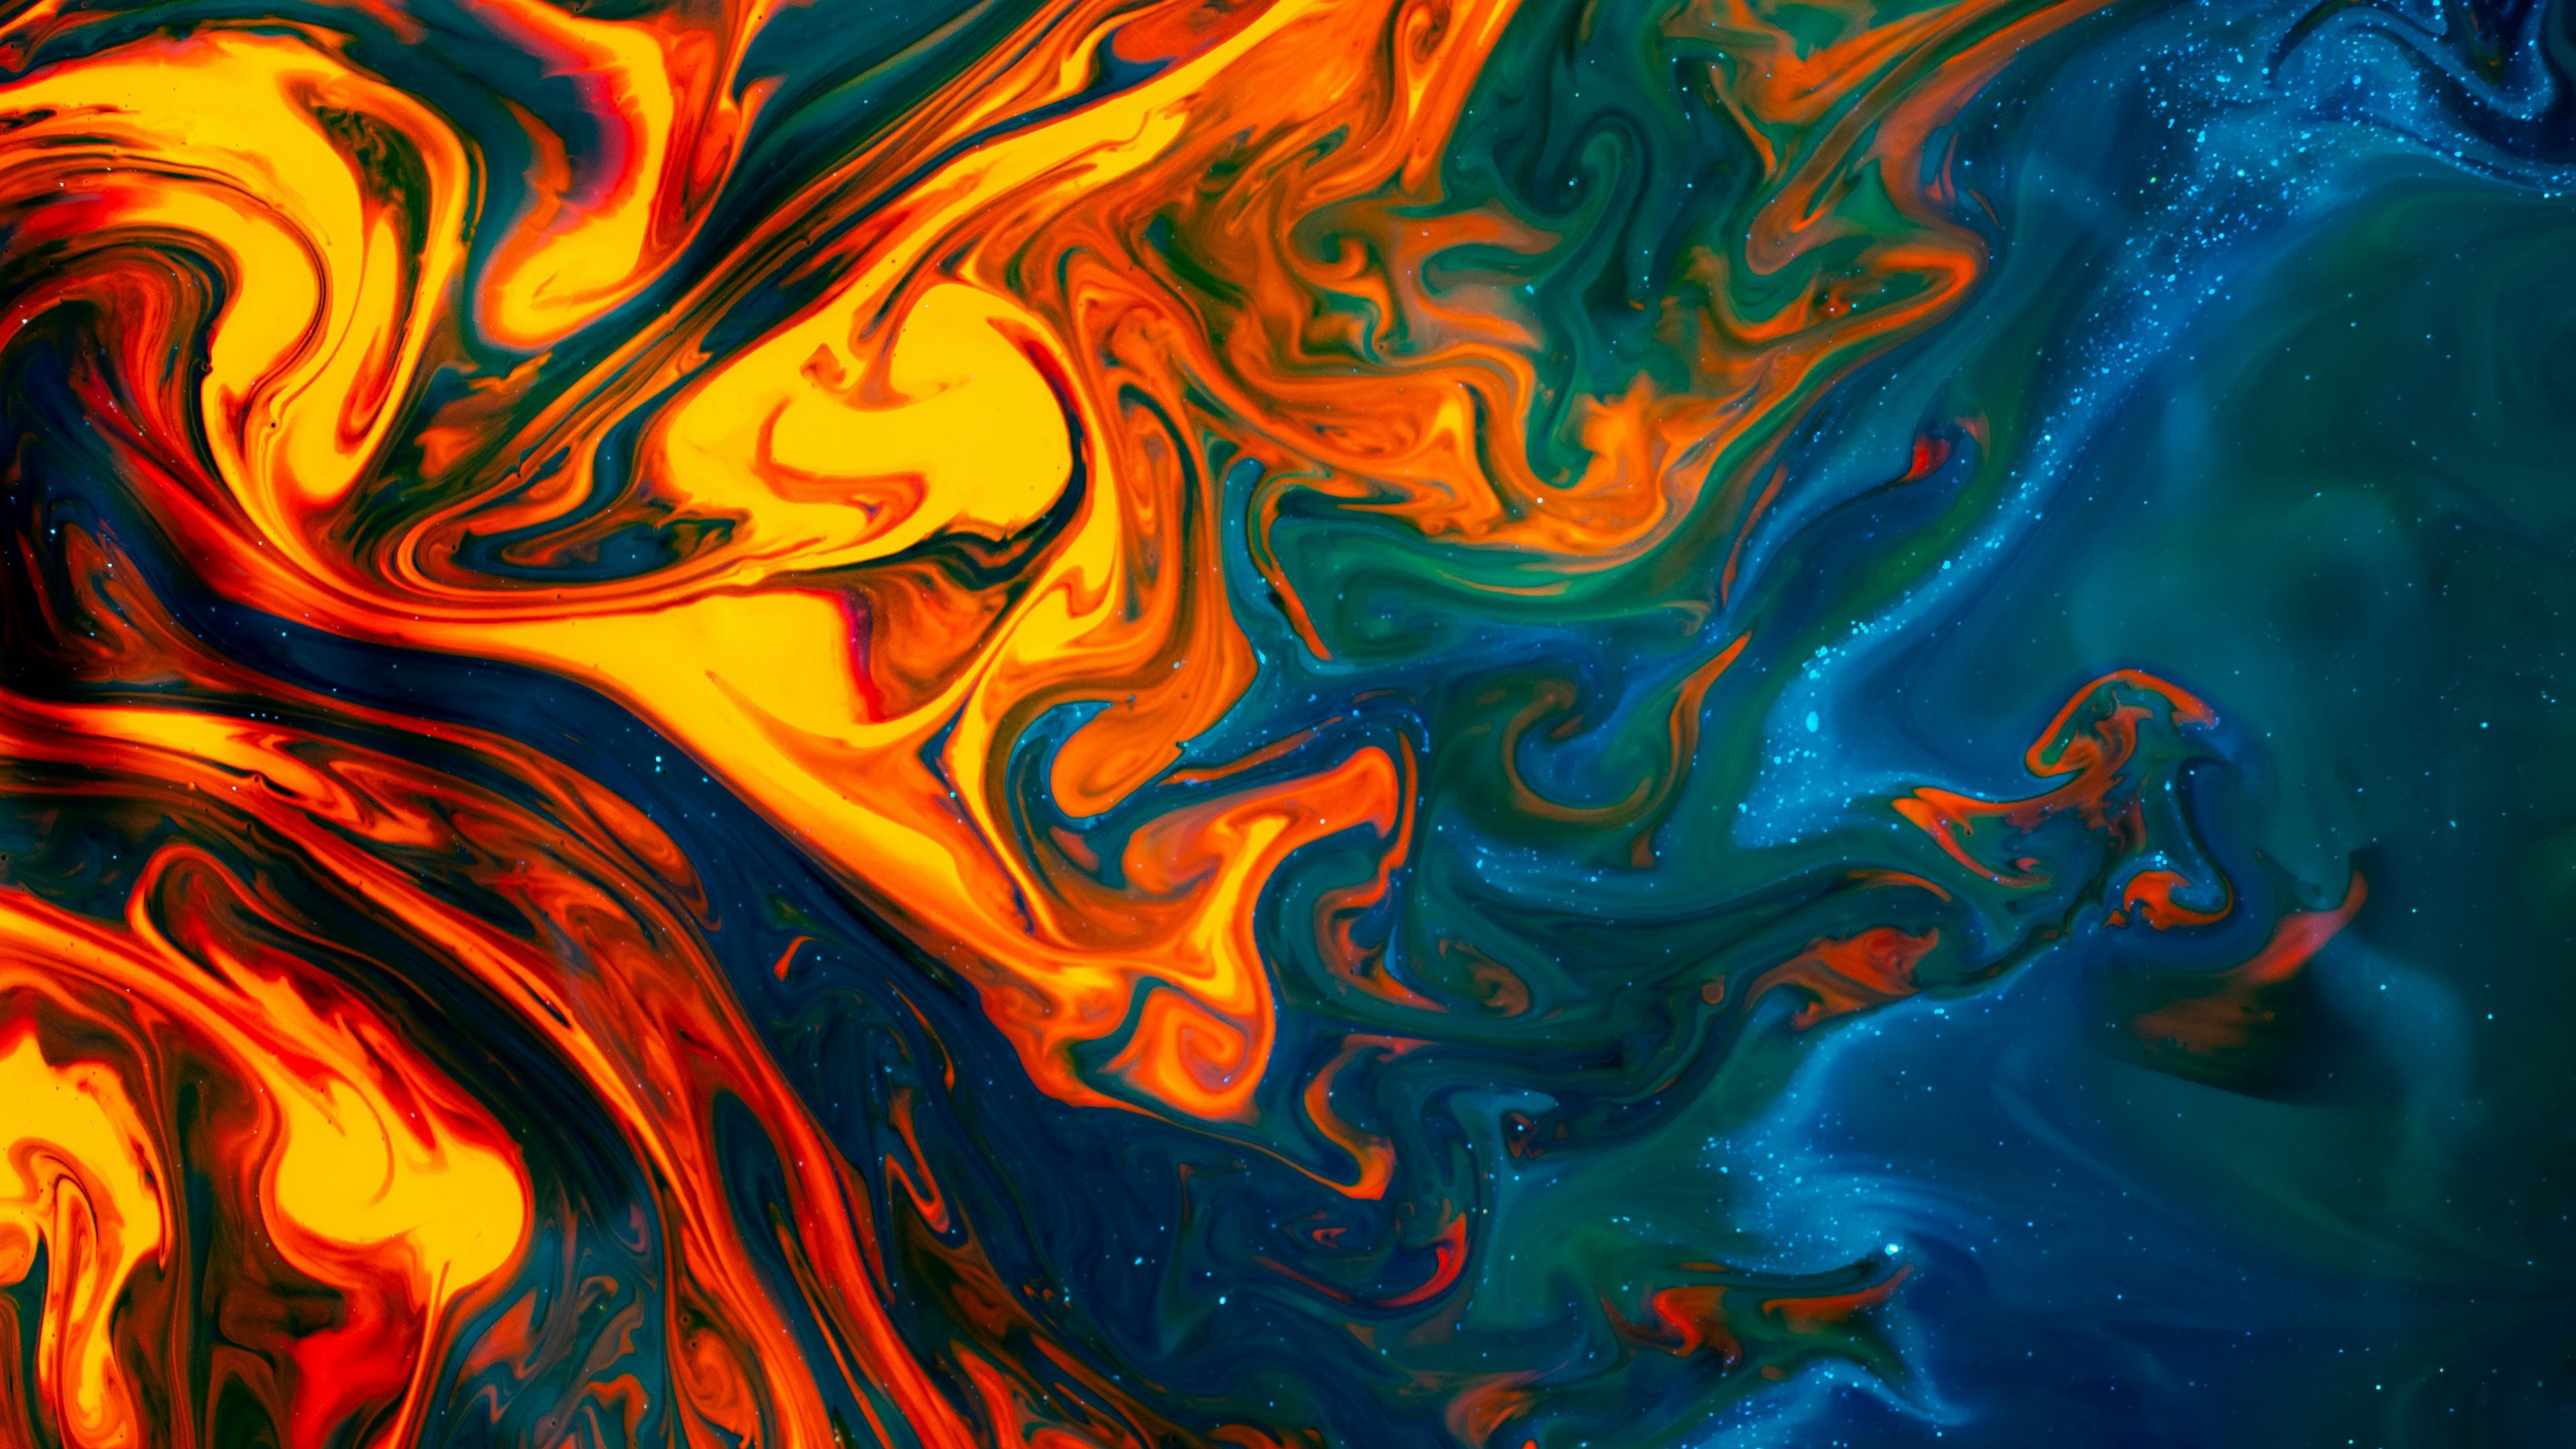 Download wallpaper 3840x2160 stains, paint, liquid, mixing, colors 4k uhd 16:9 HD background